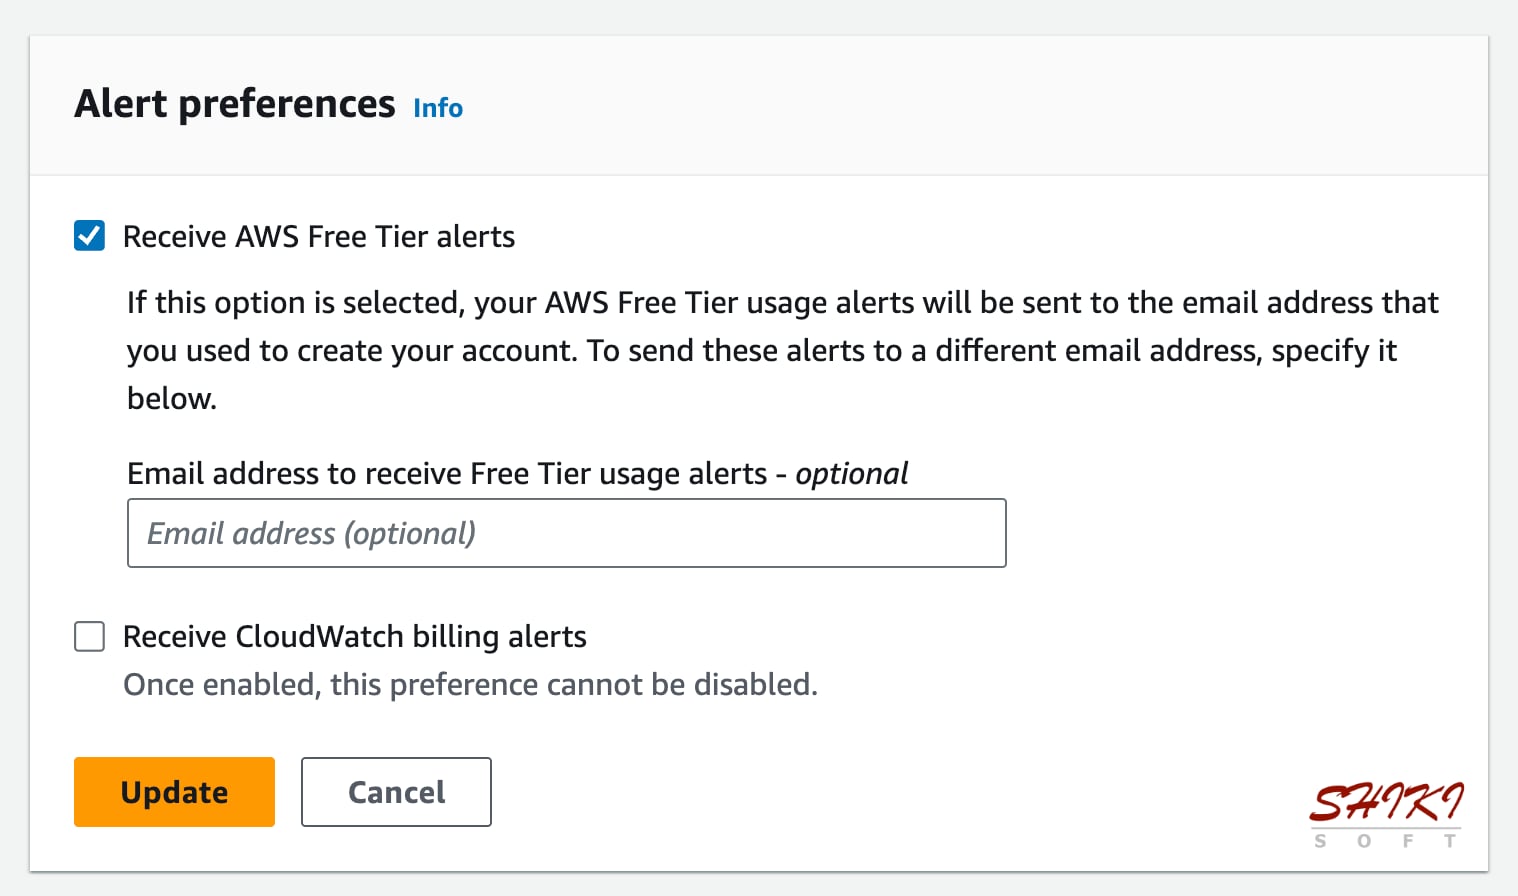 Enabling AWS free tier alerts from the Billing Preferences.